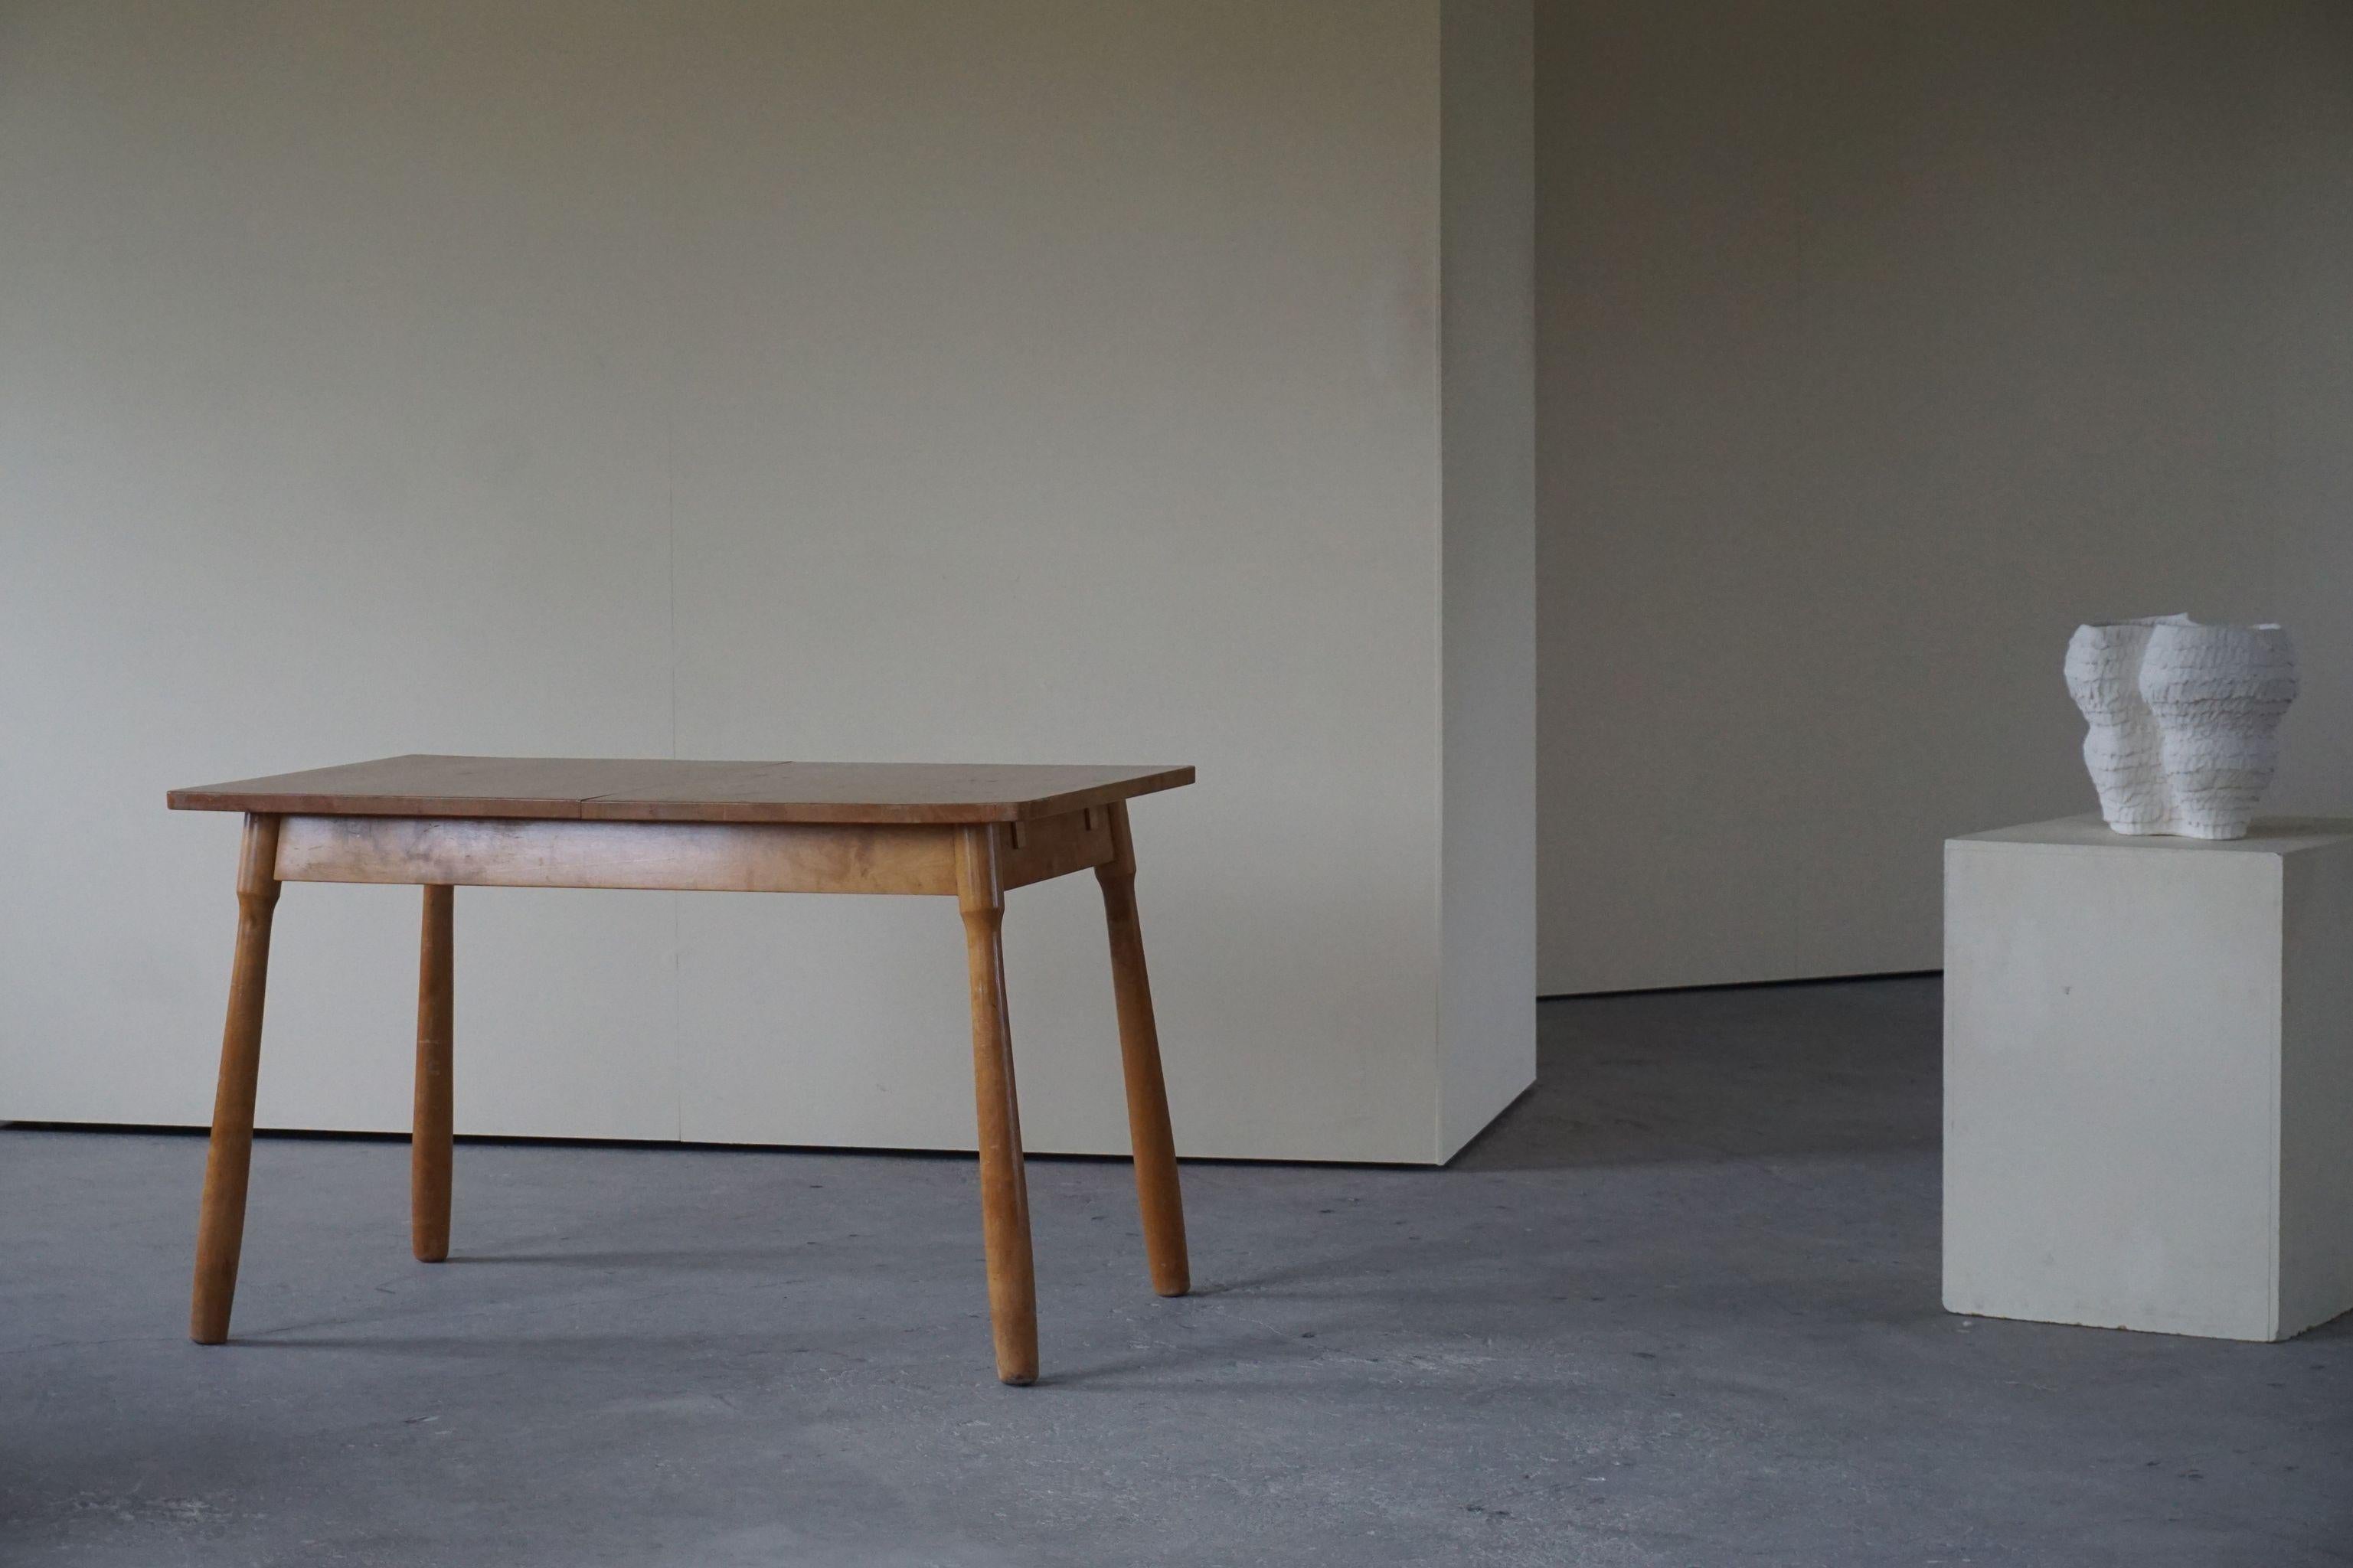 Mid-20th Century Danish Modern Desk / Dining Table in Birch Attributed to Philip Arctander, 1940s For Sale